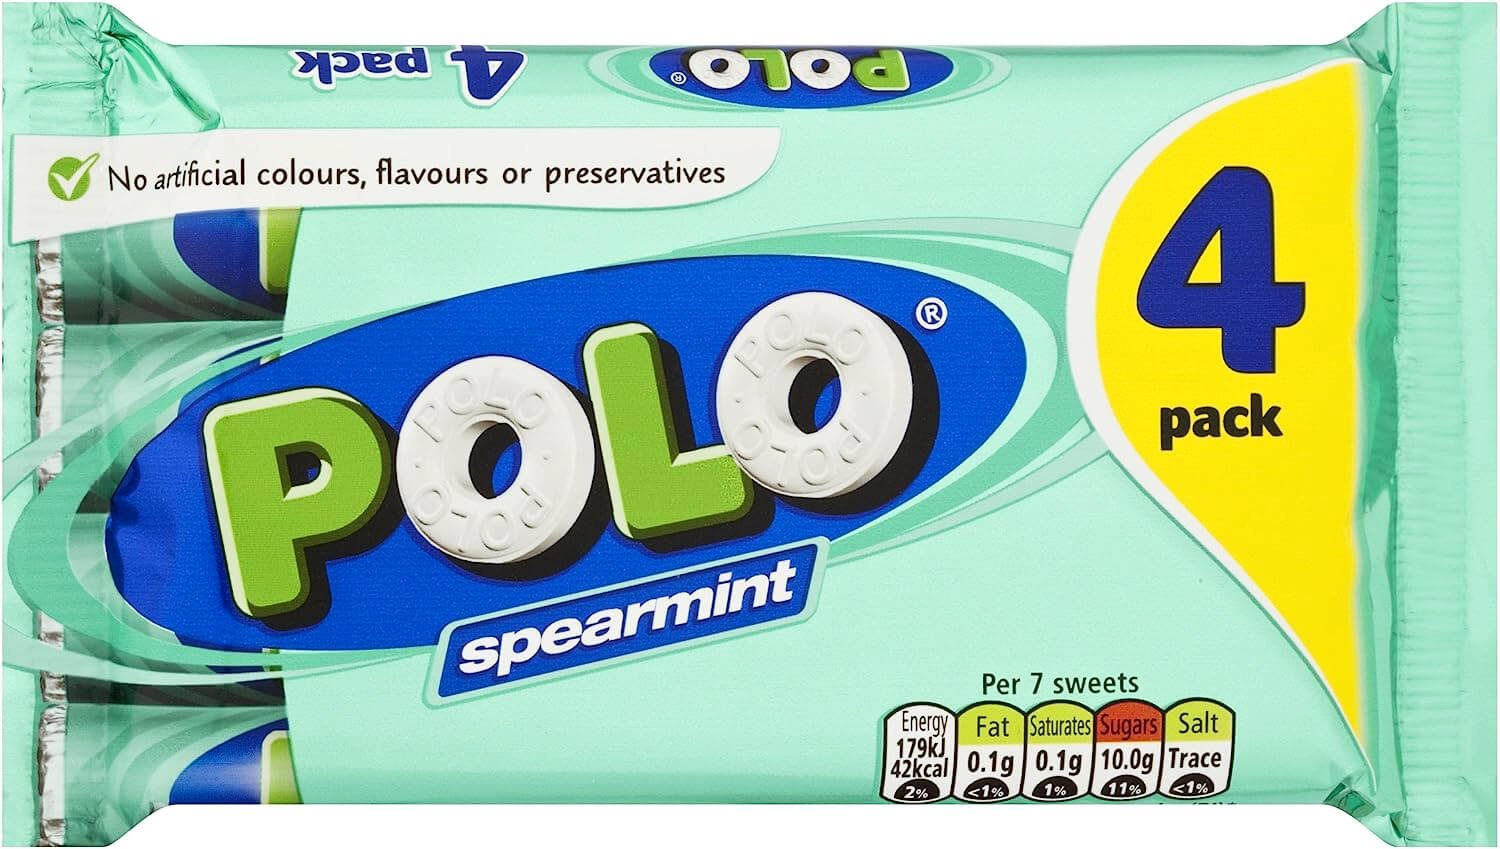 Polo Spearmint 4 pack - 2015